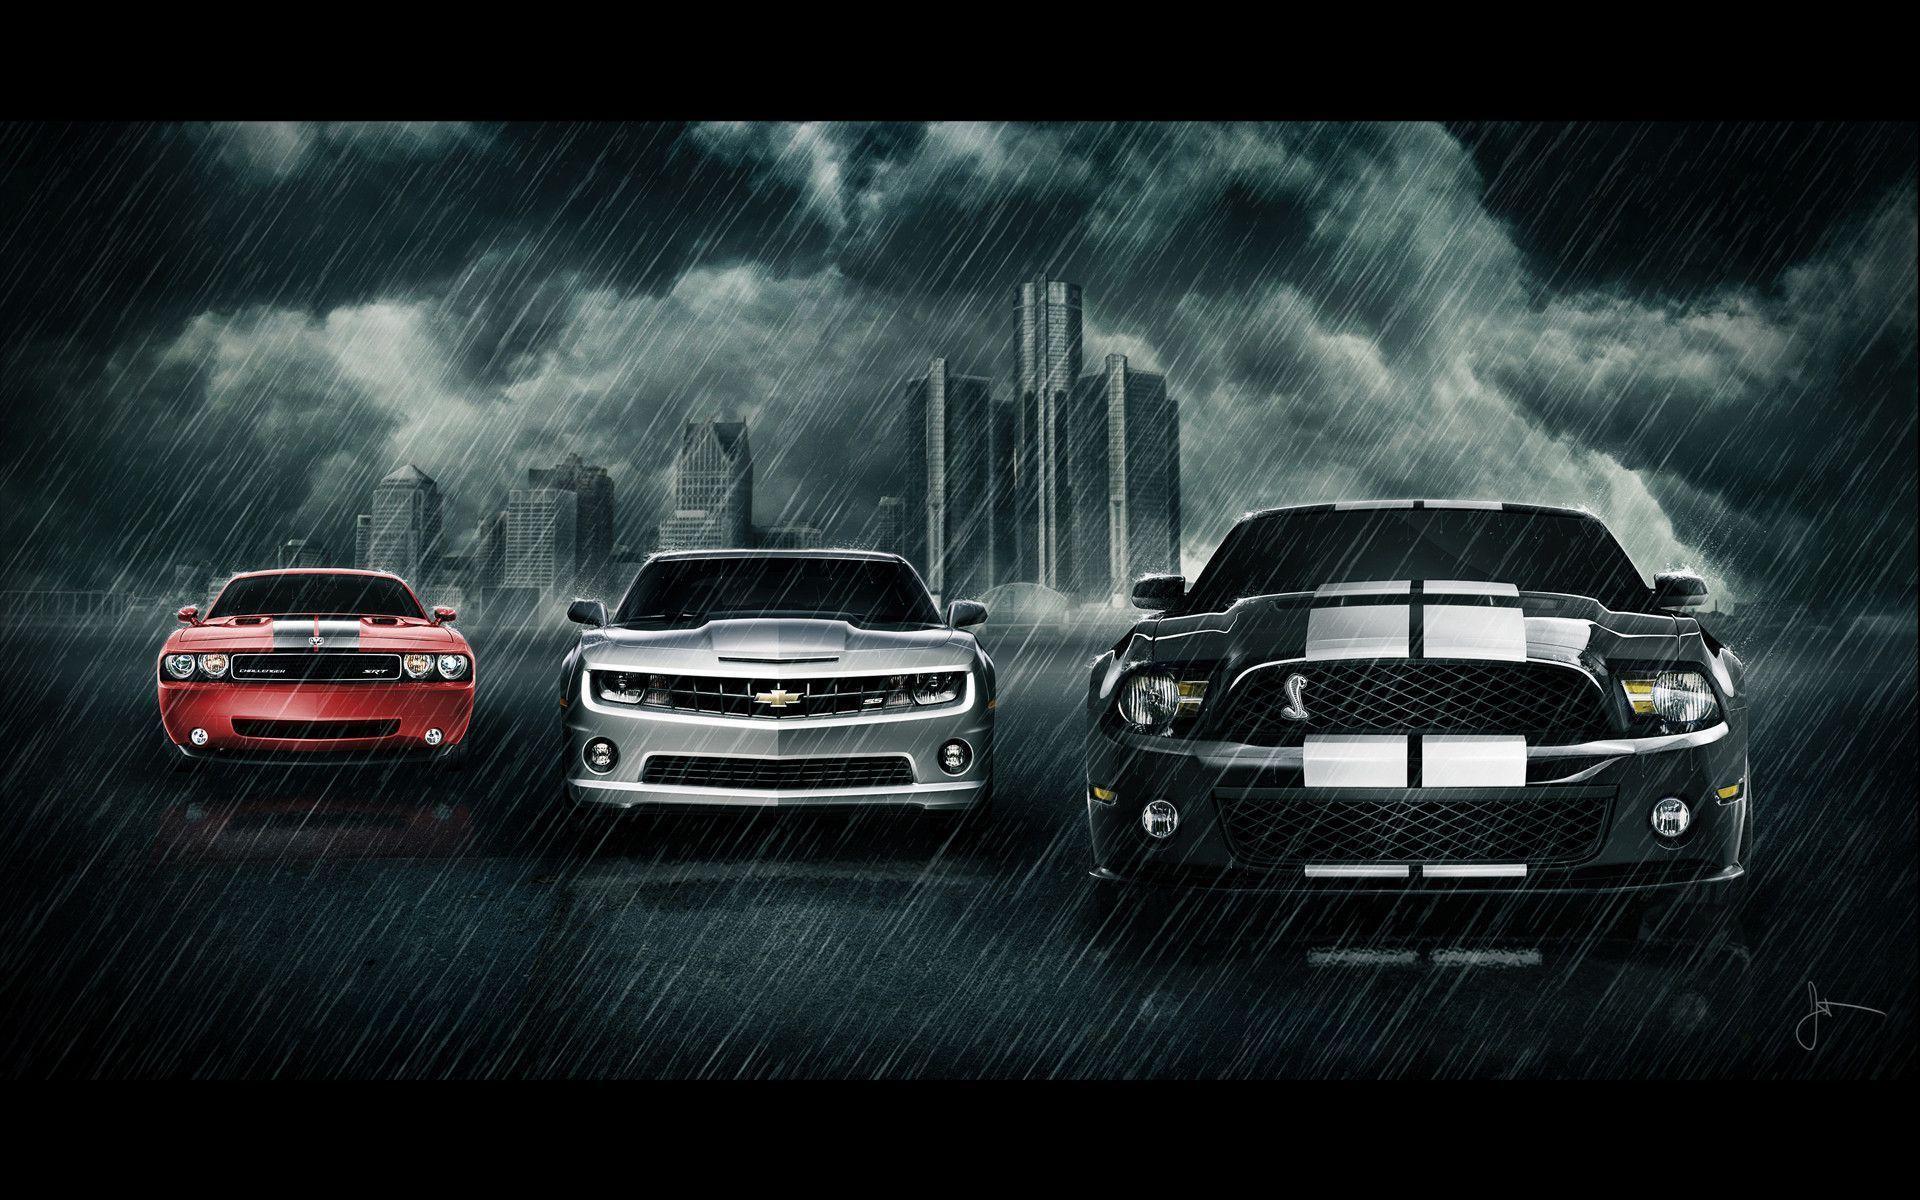 Cool 16 Awesome Cars Wallpaper HD Collection 2014 15